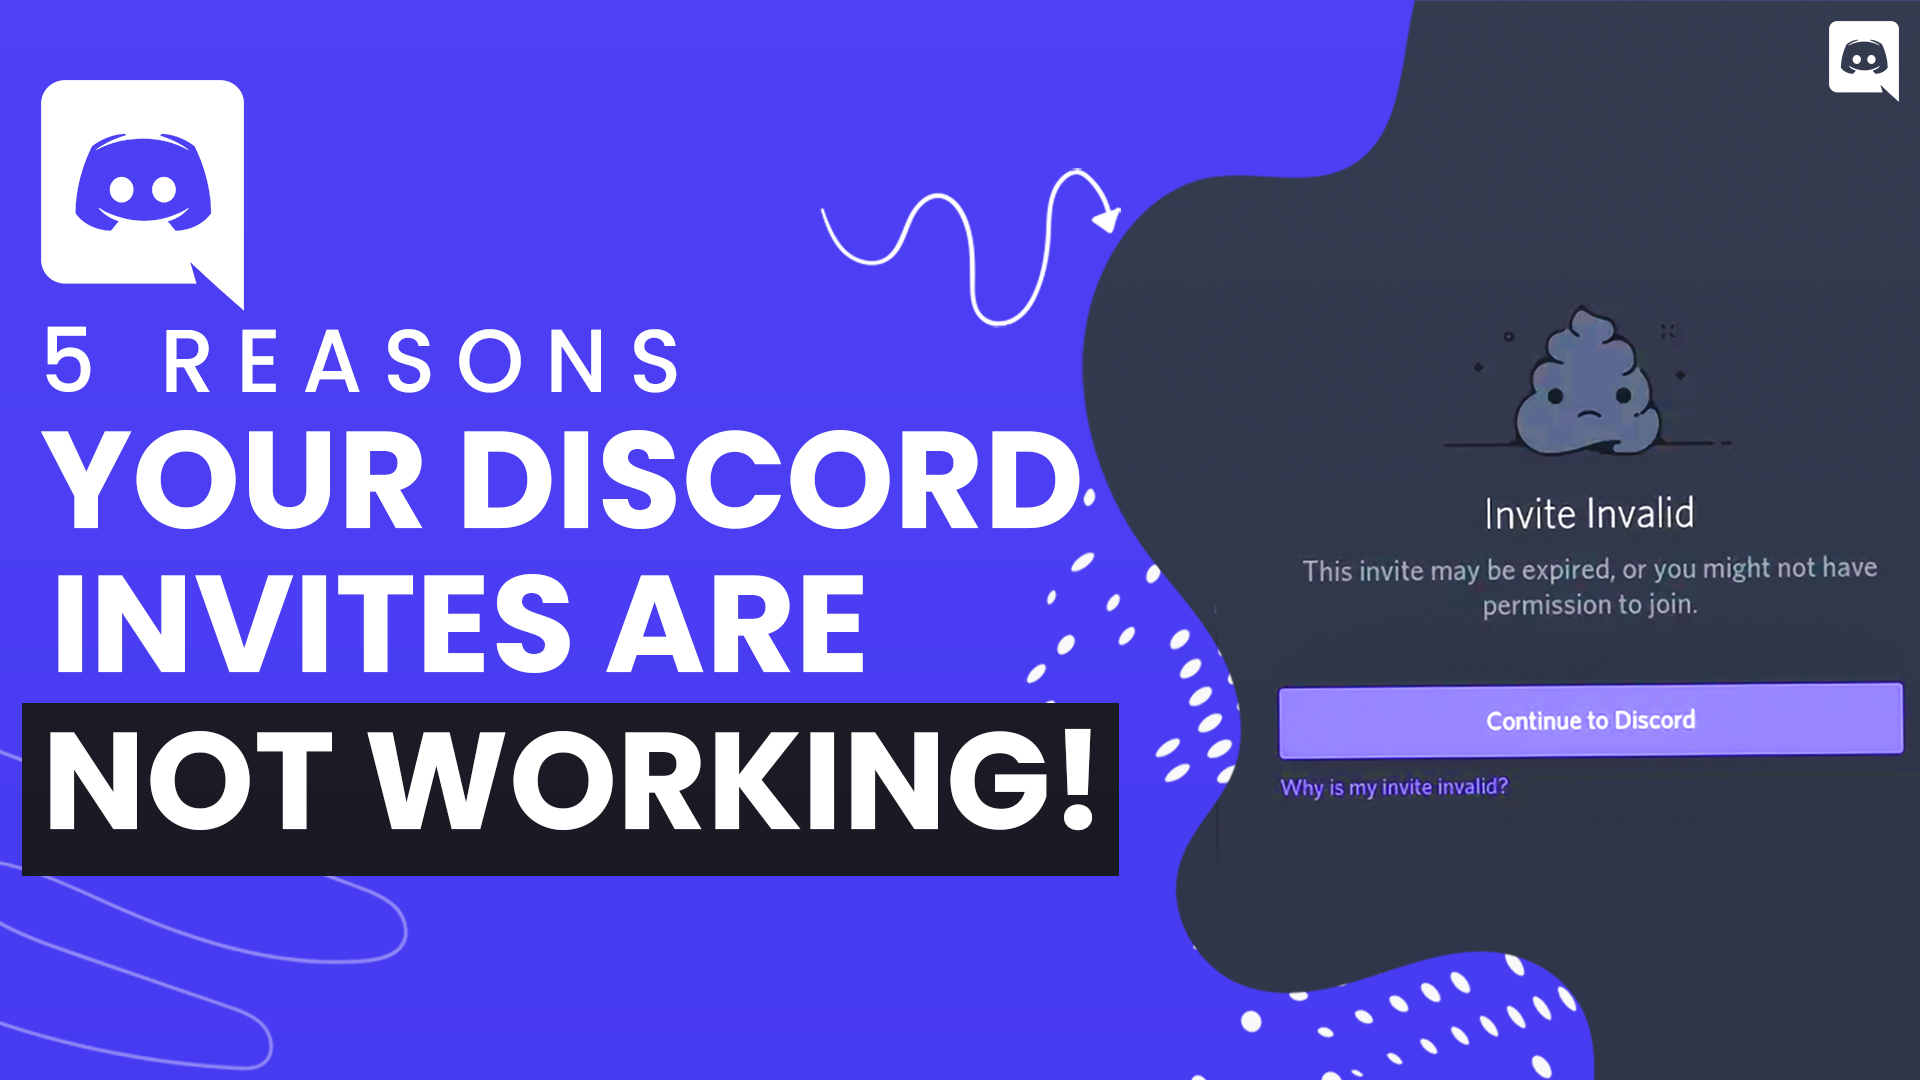 5 Reasons Your Discord Invites are Not Working!